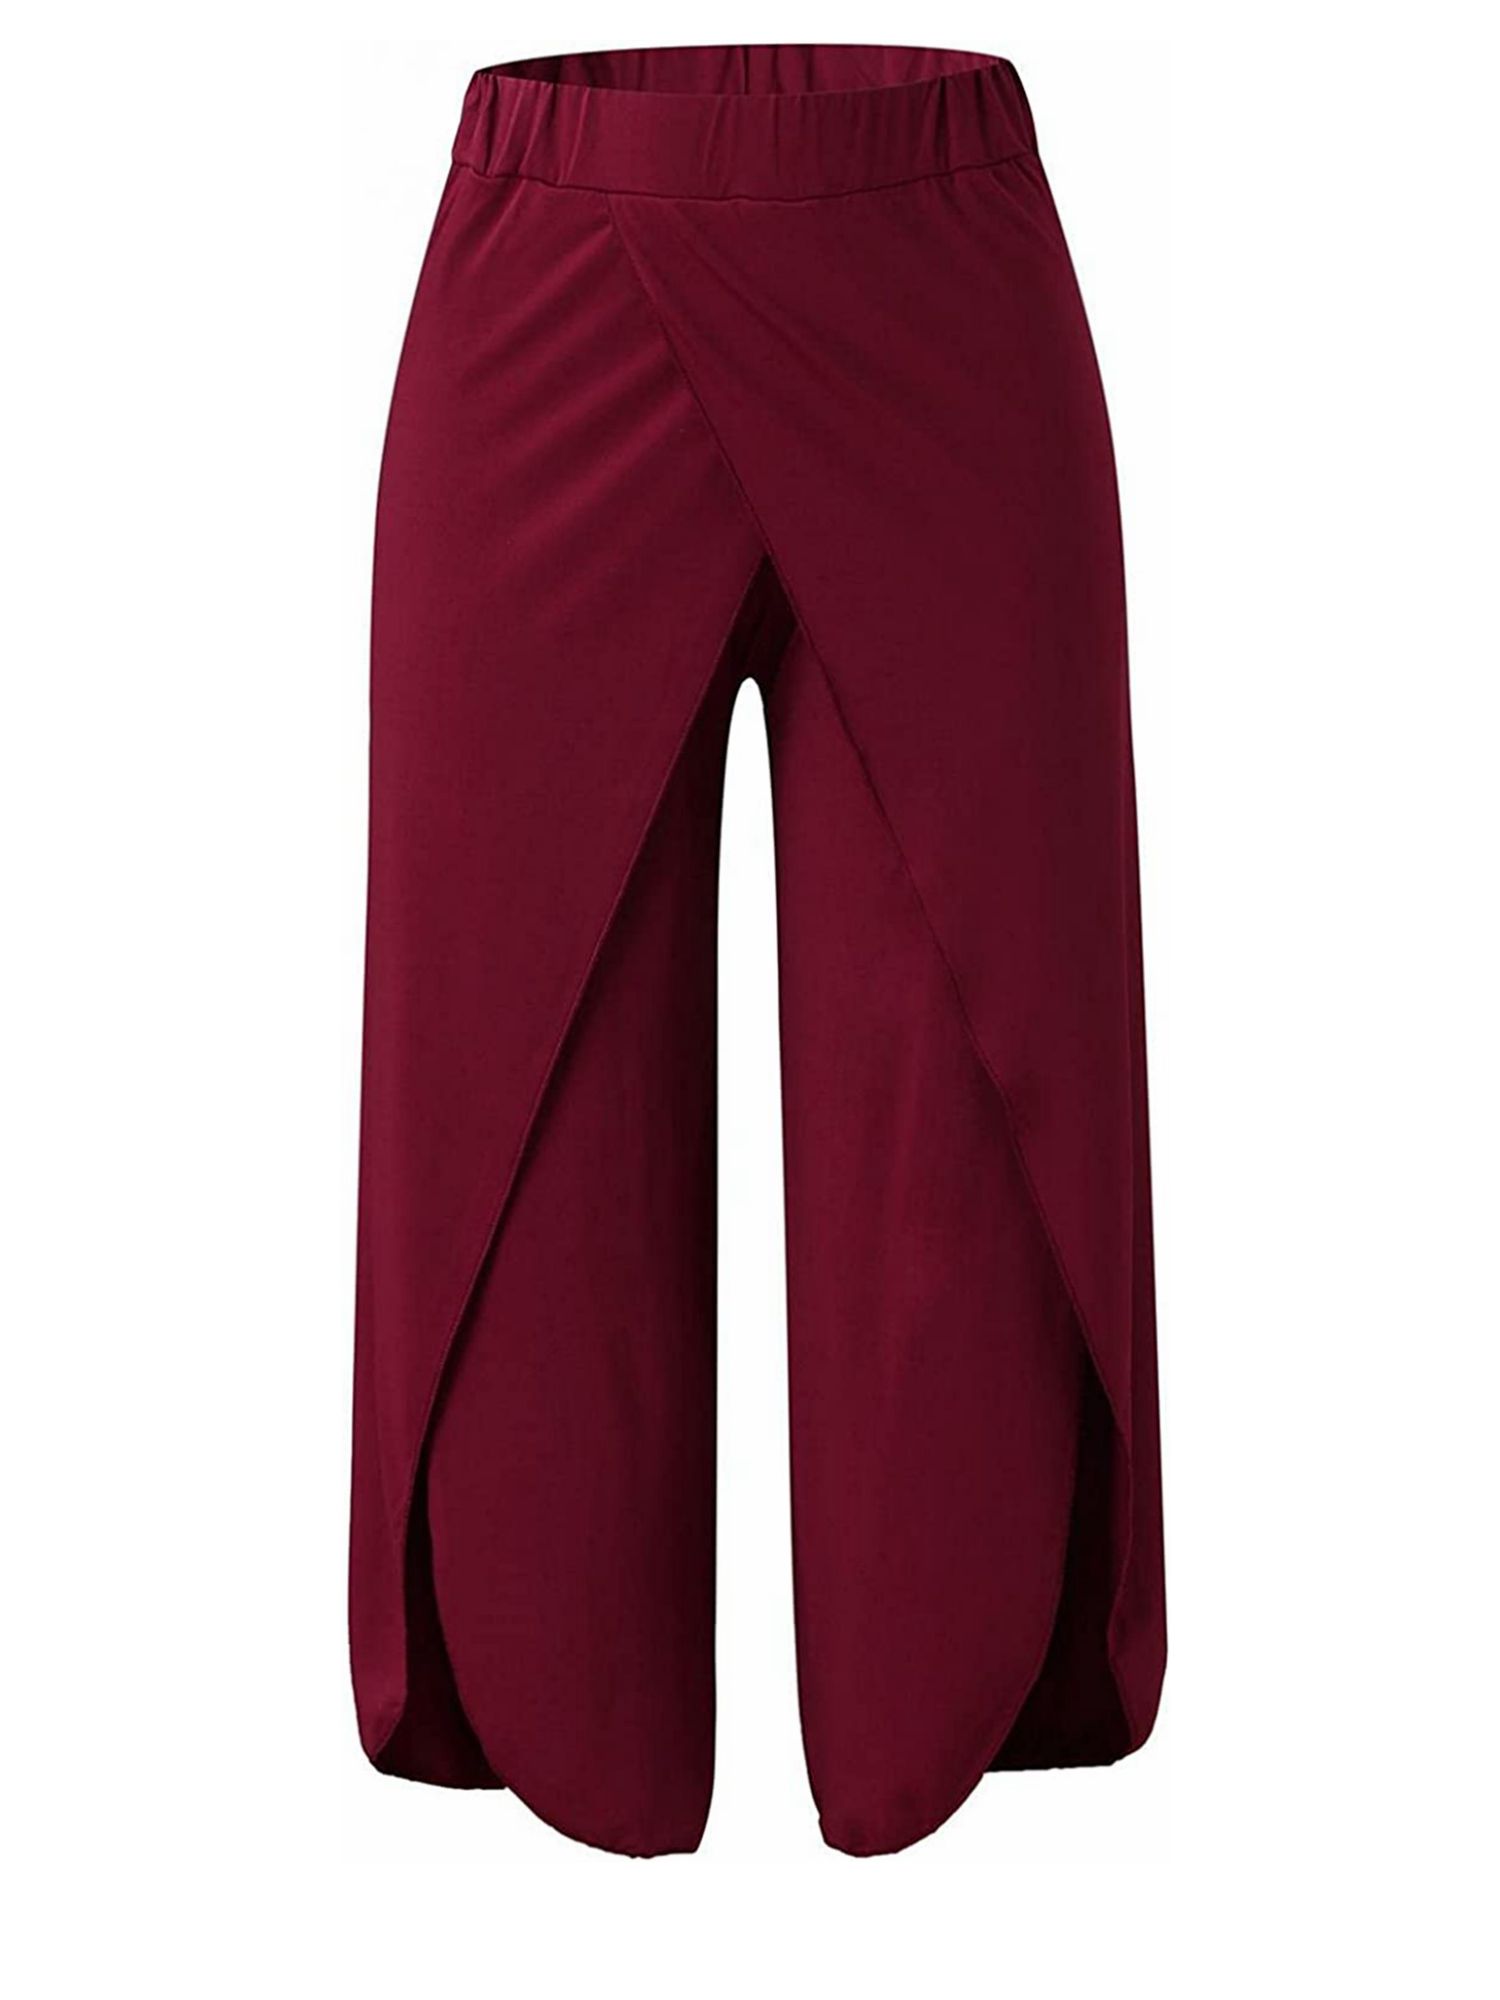 Syiwidii Burgundy Leather Pants Women Wide Leg Trousers Korean Style Y2k  Fashion Loose Pants High Waisted